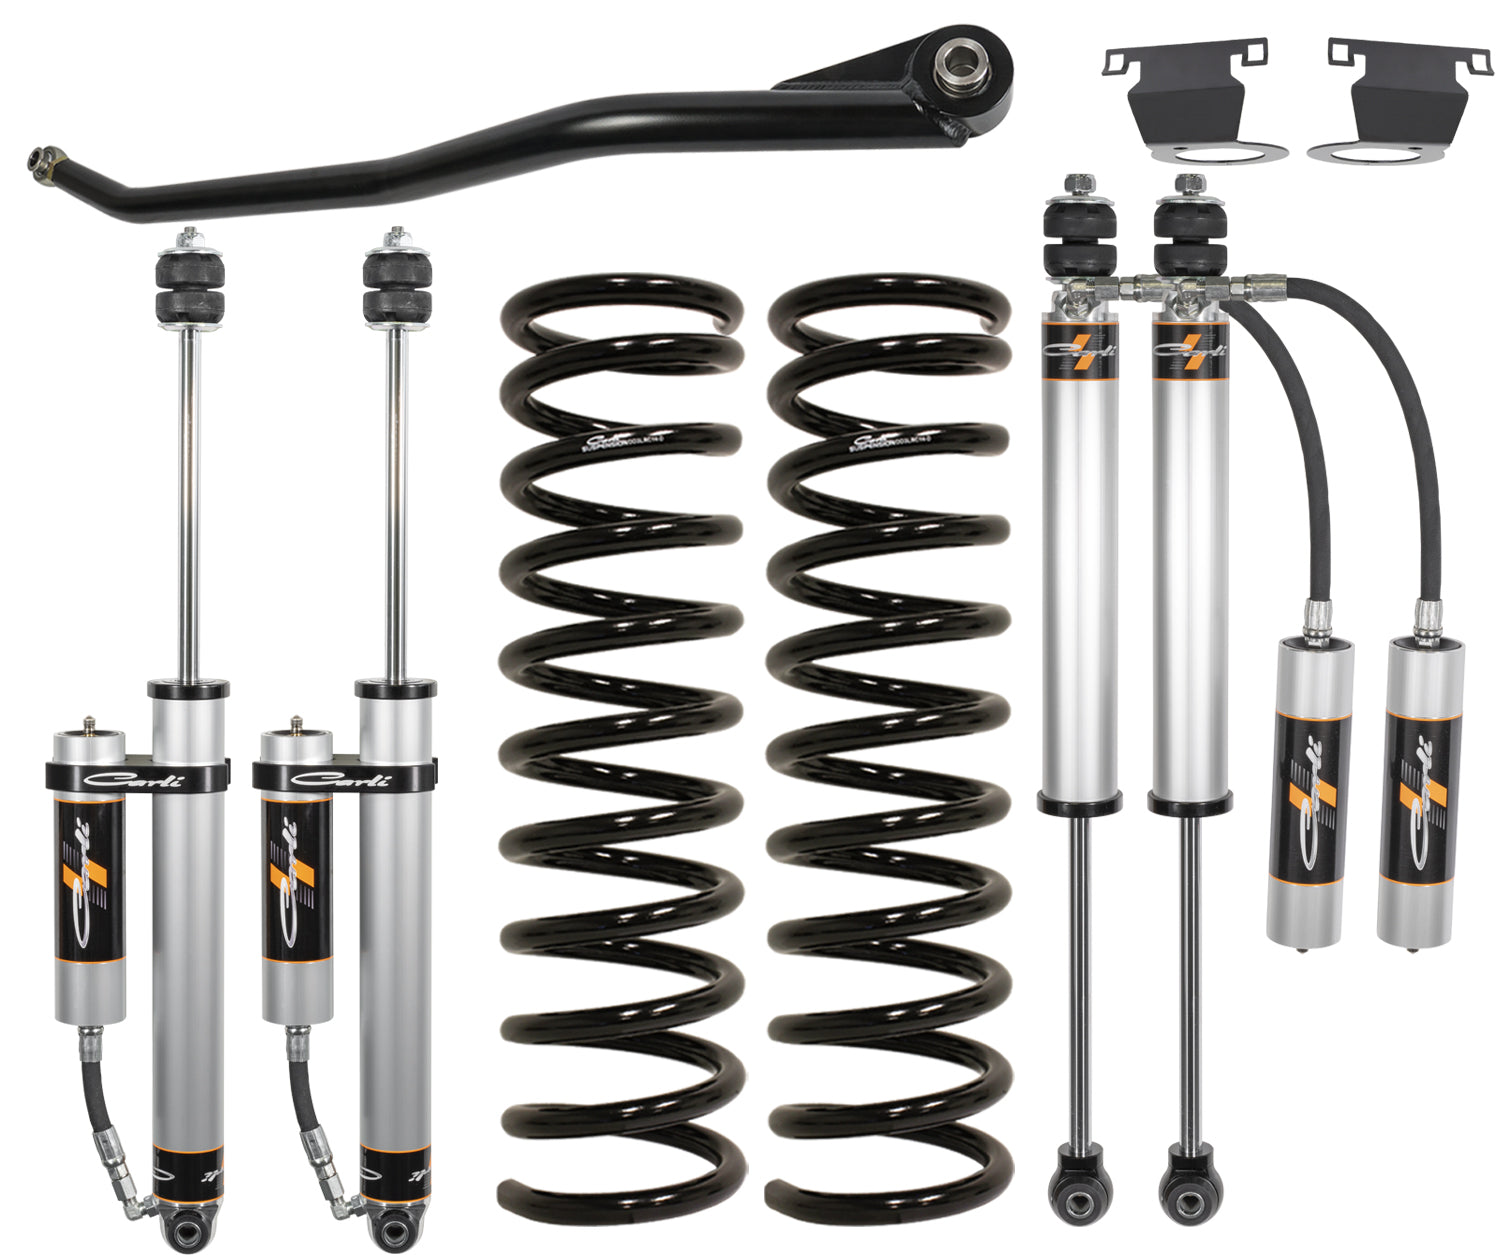 Carli Suspension 2.5" Backcountry Leveling Coil Suspension System